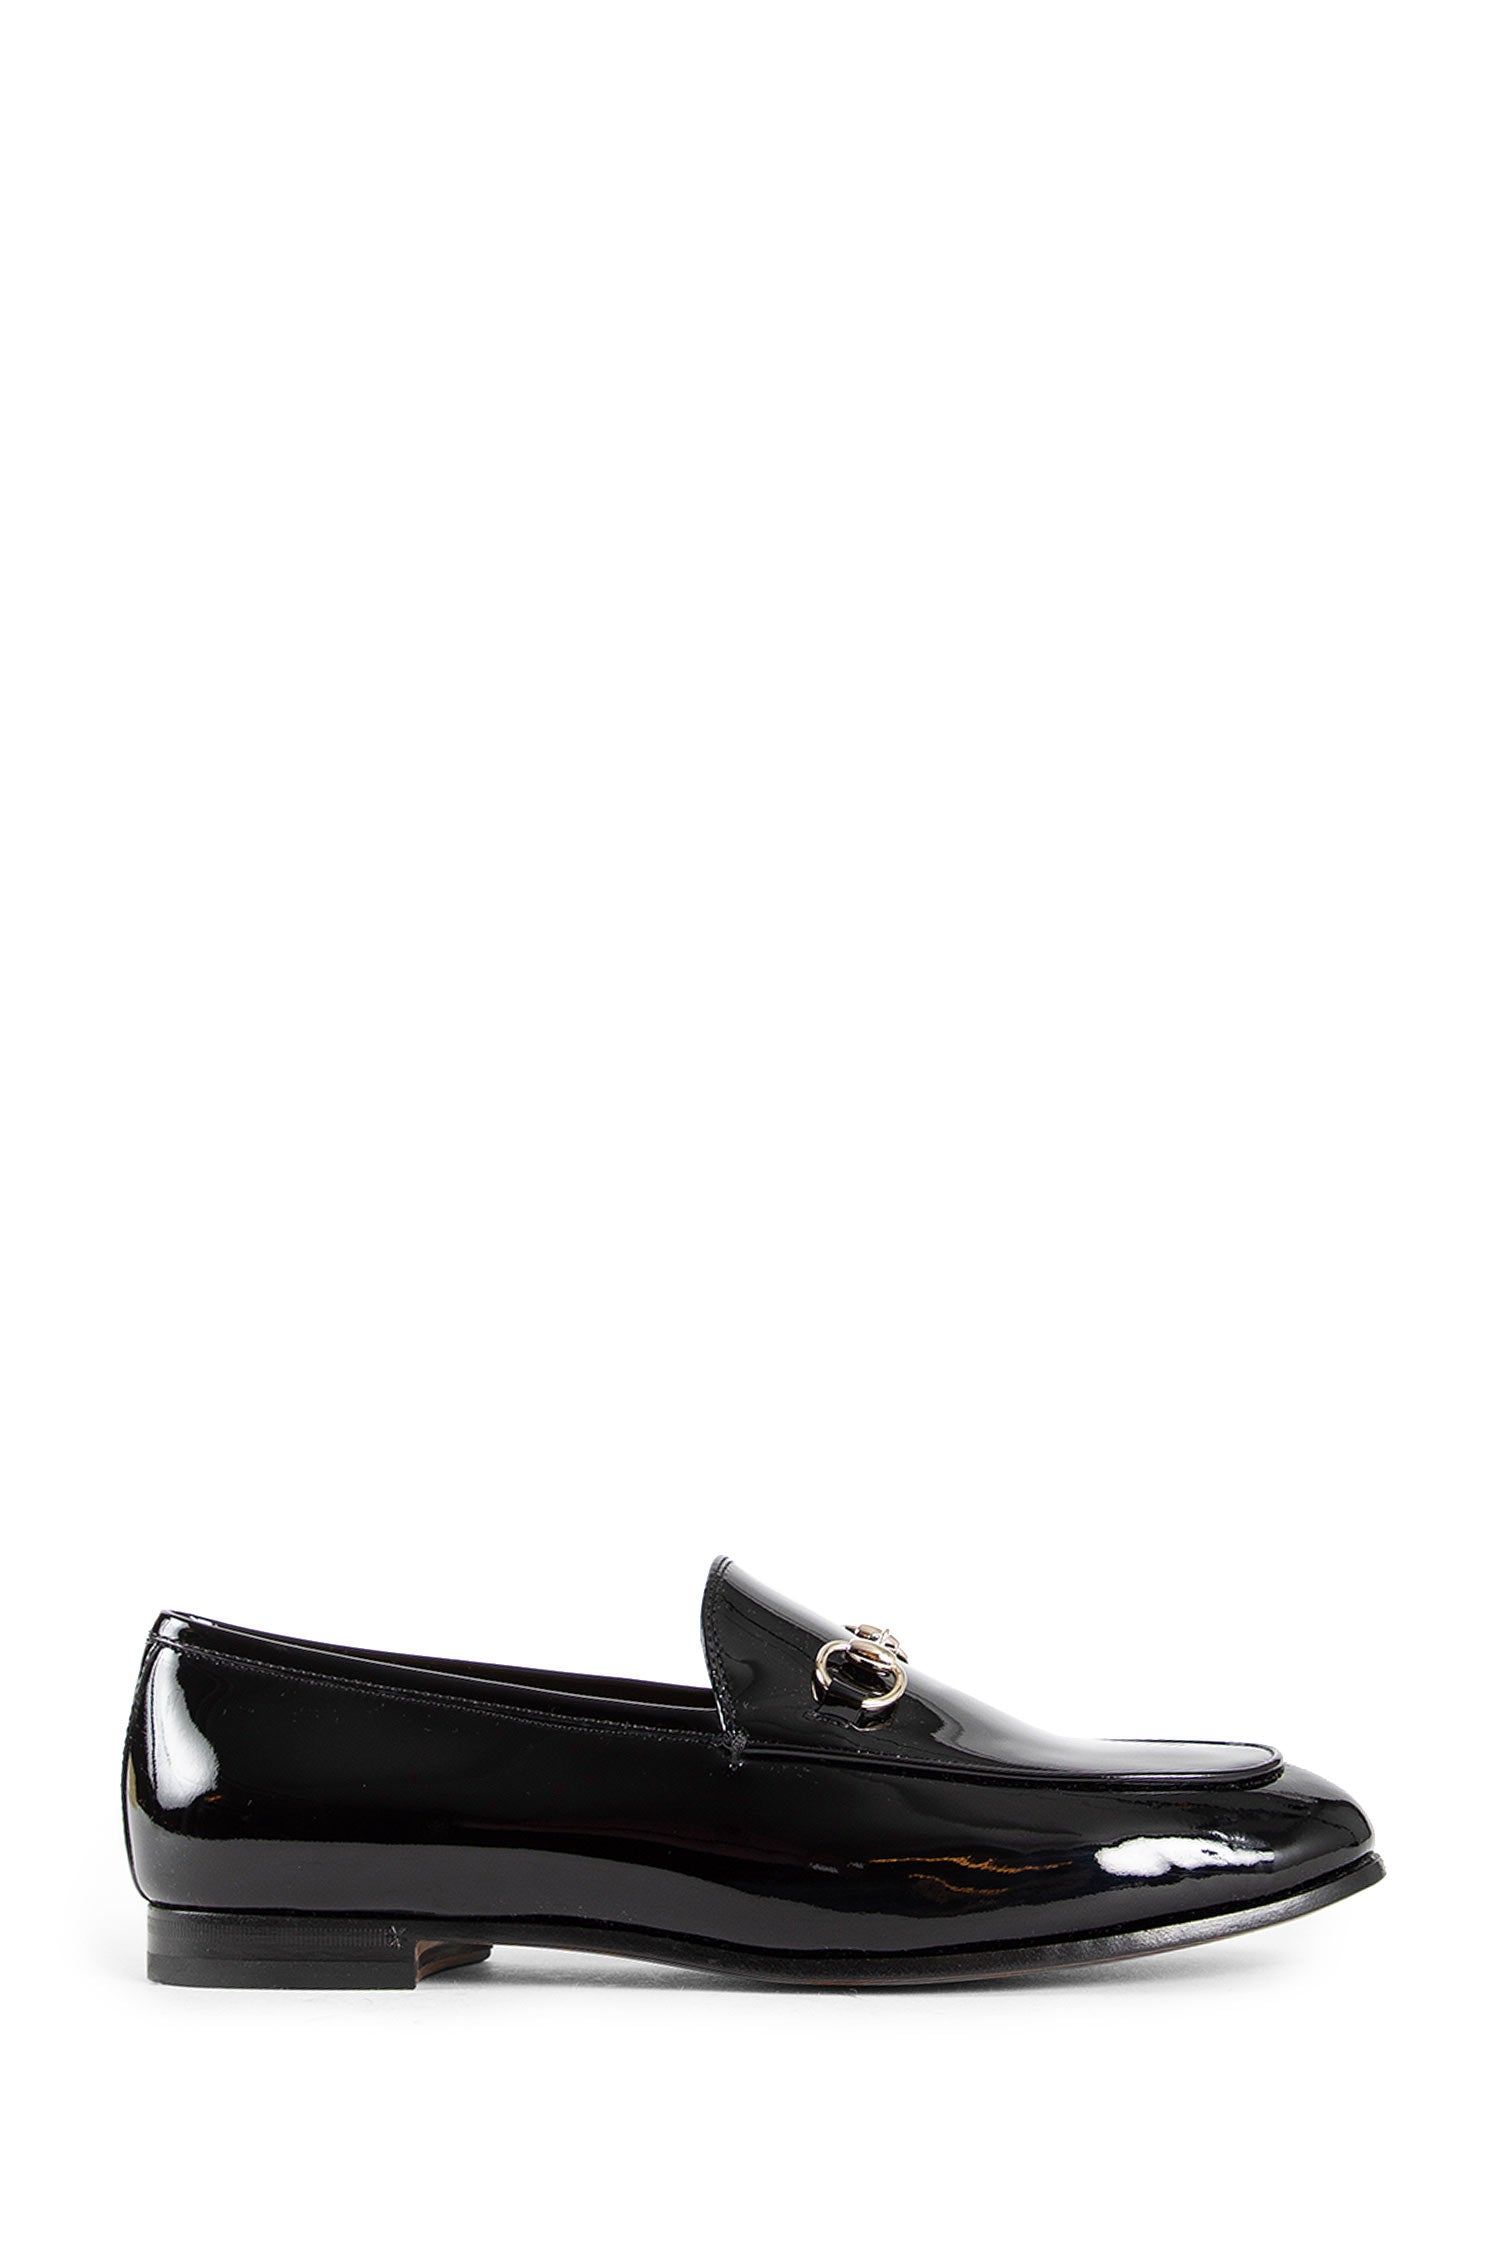 GUCCI WOMAN BLACK LOAFERS & FLATS